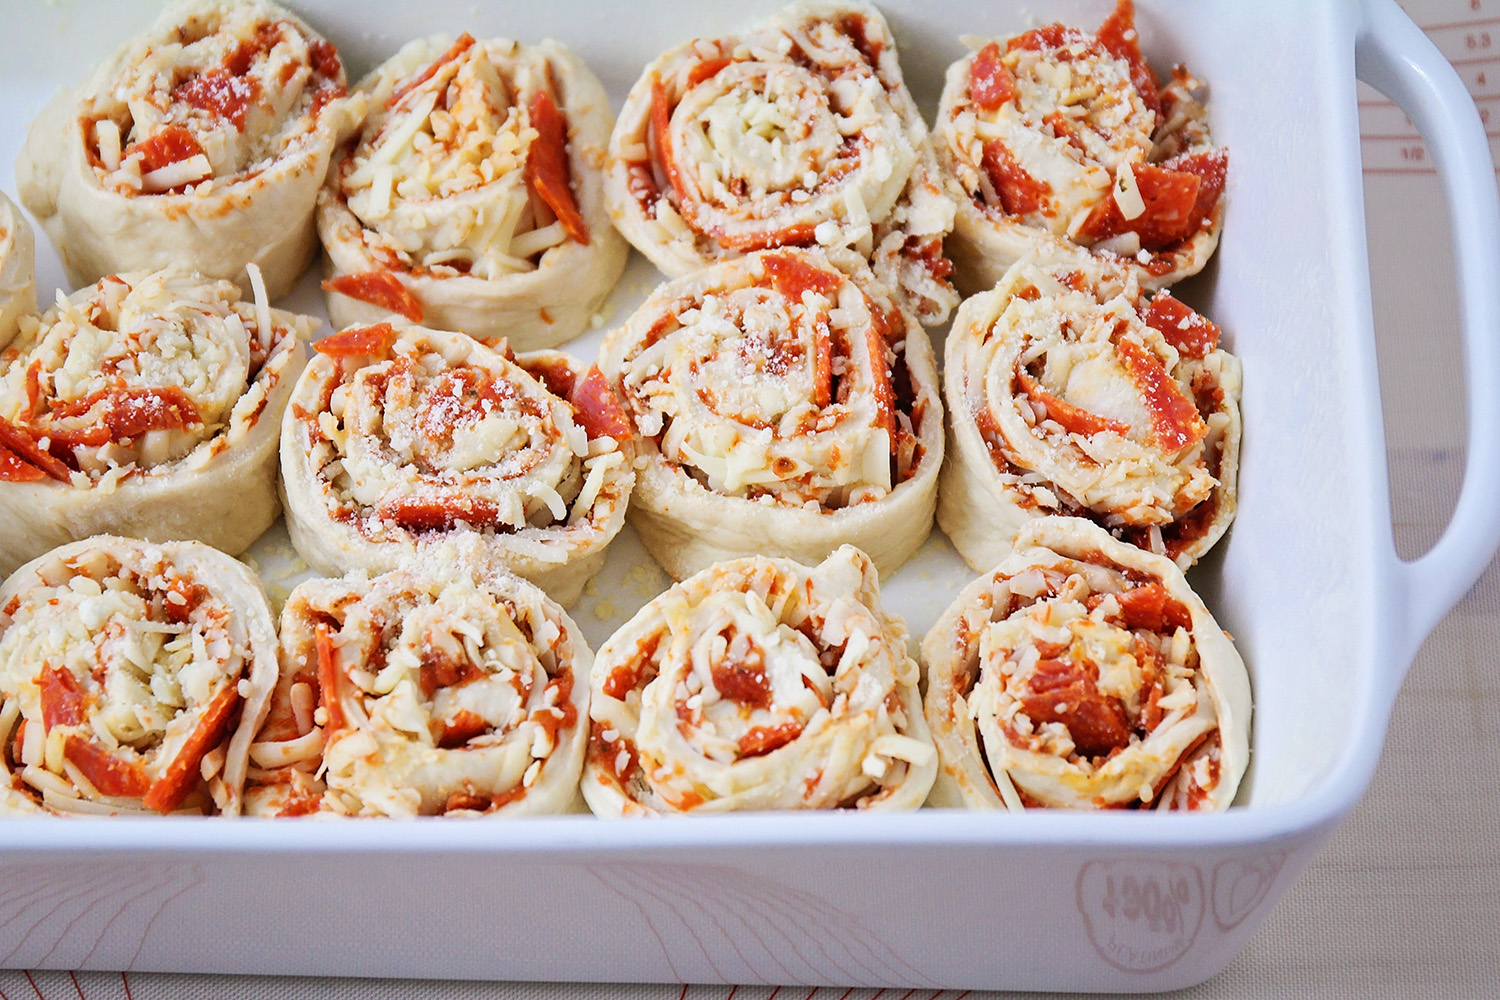 These cheesy and delicious pepperoni pizza rolls are kid-friendly, and so easy to make!